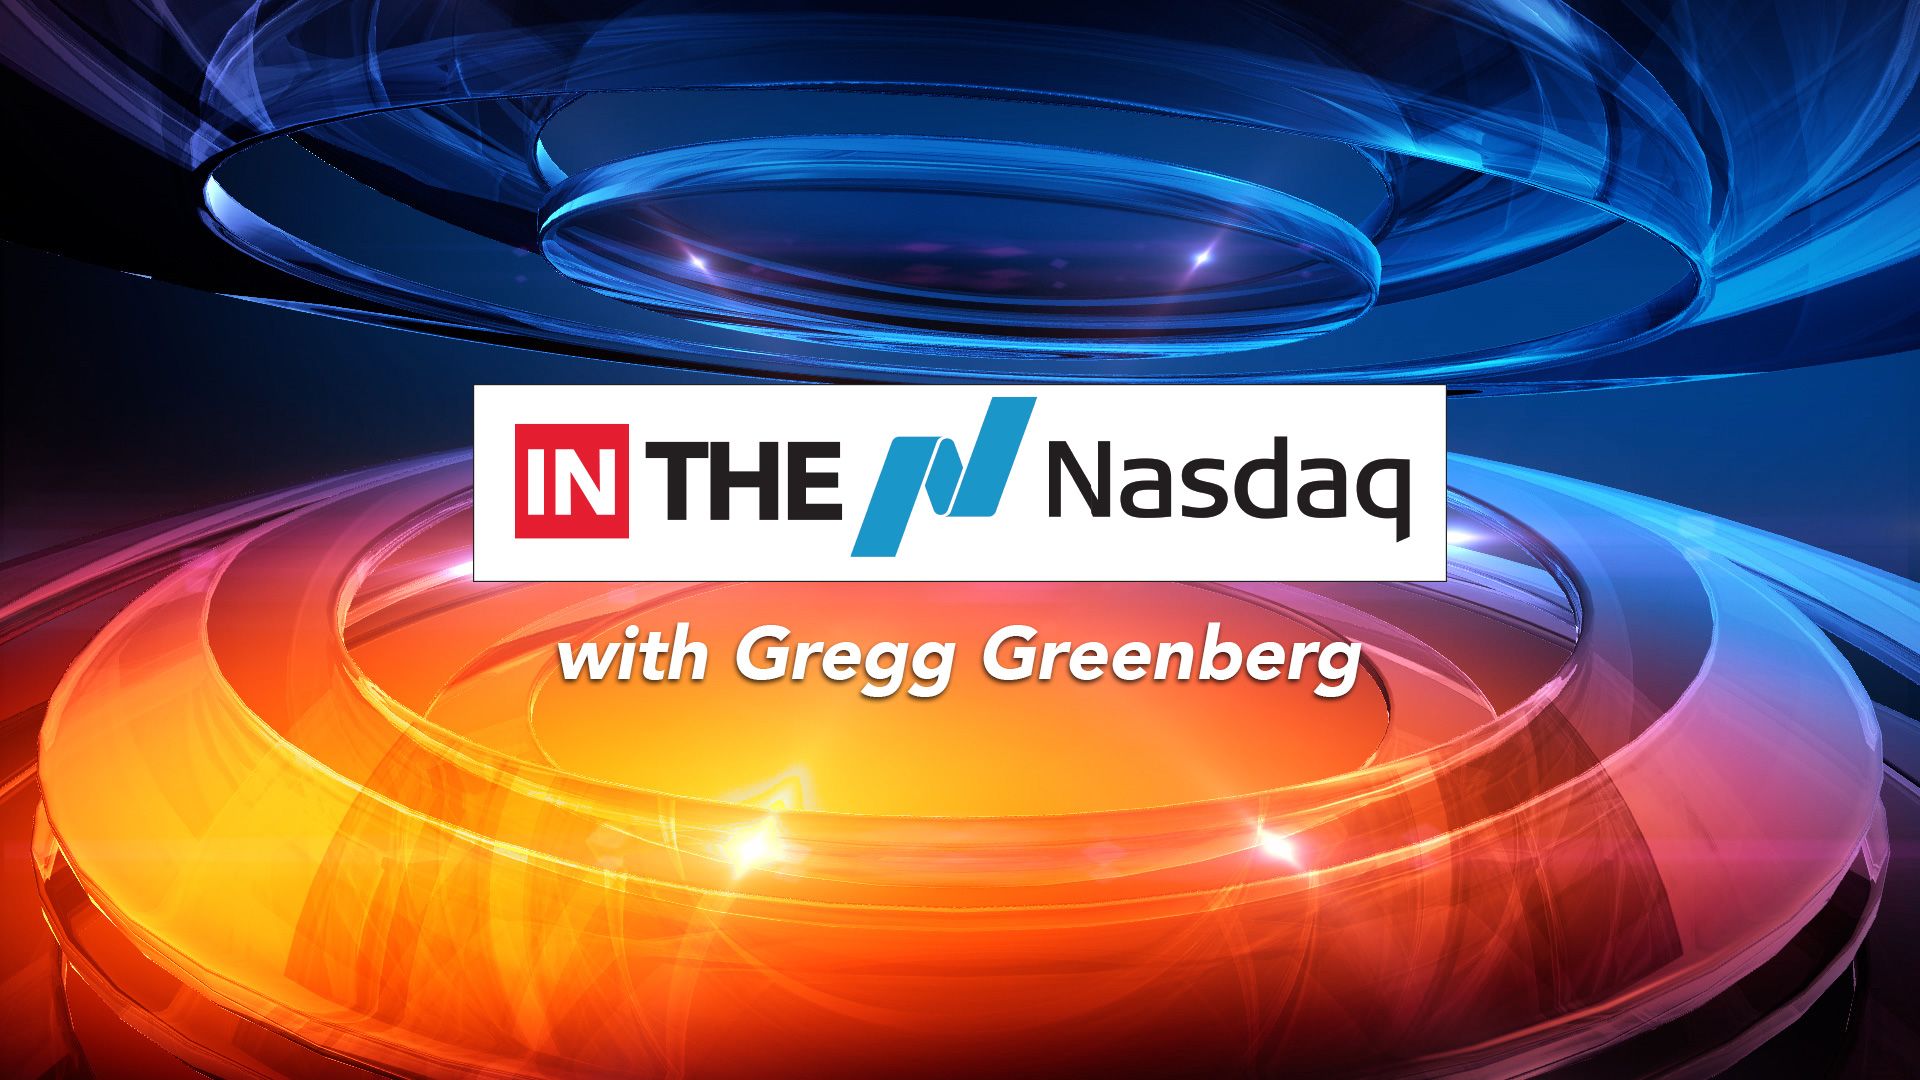 ‘IN the Nasdaq’ with Uri Levine, Waze co-founder and author